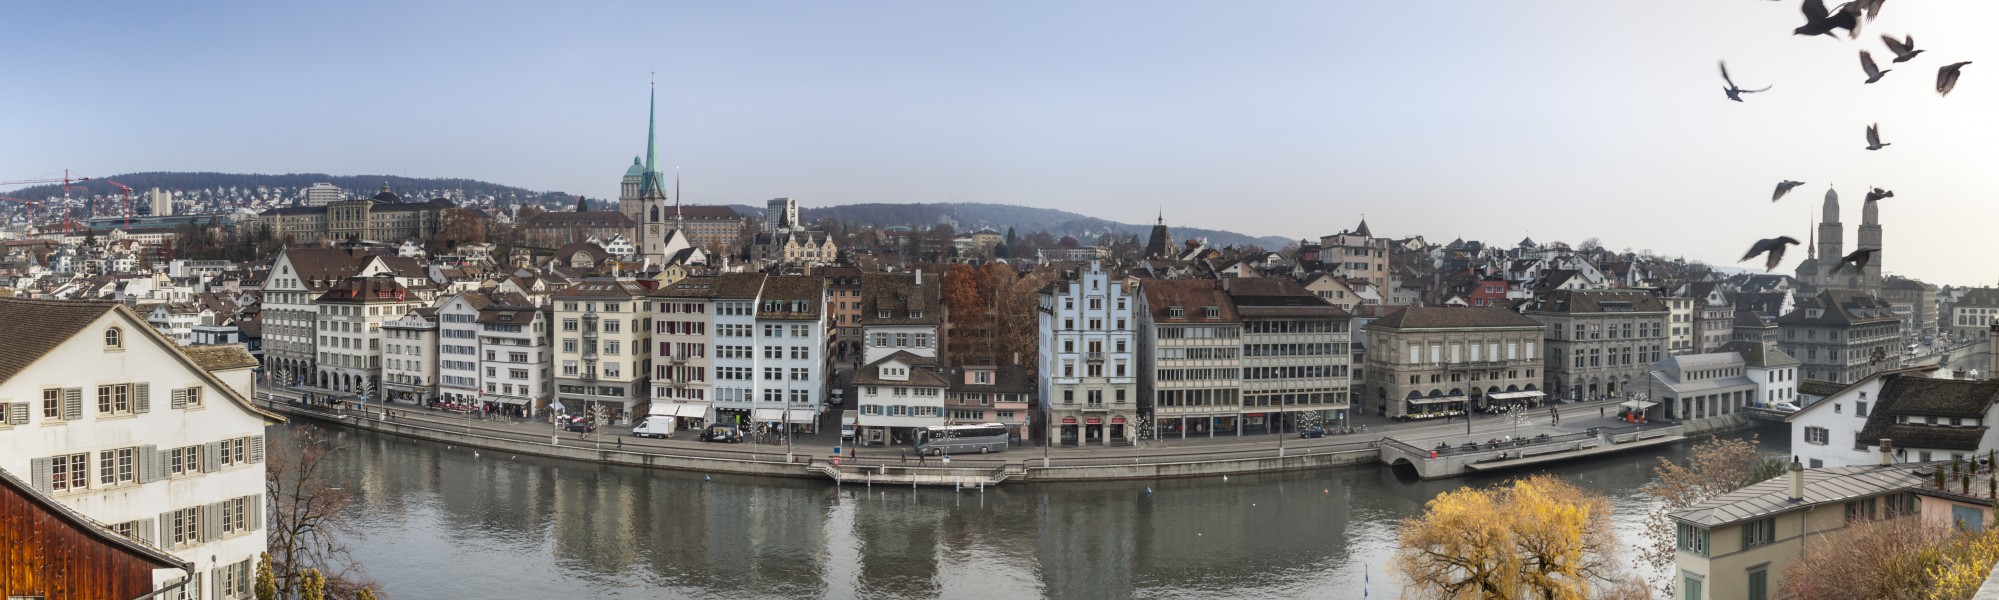 Panorama of Zurich from Lindenhof hill